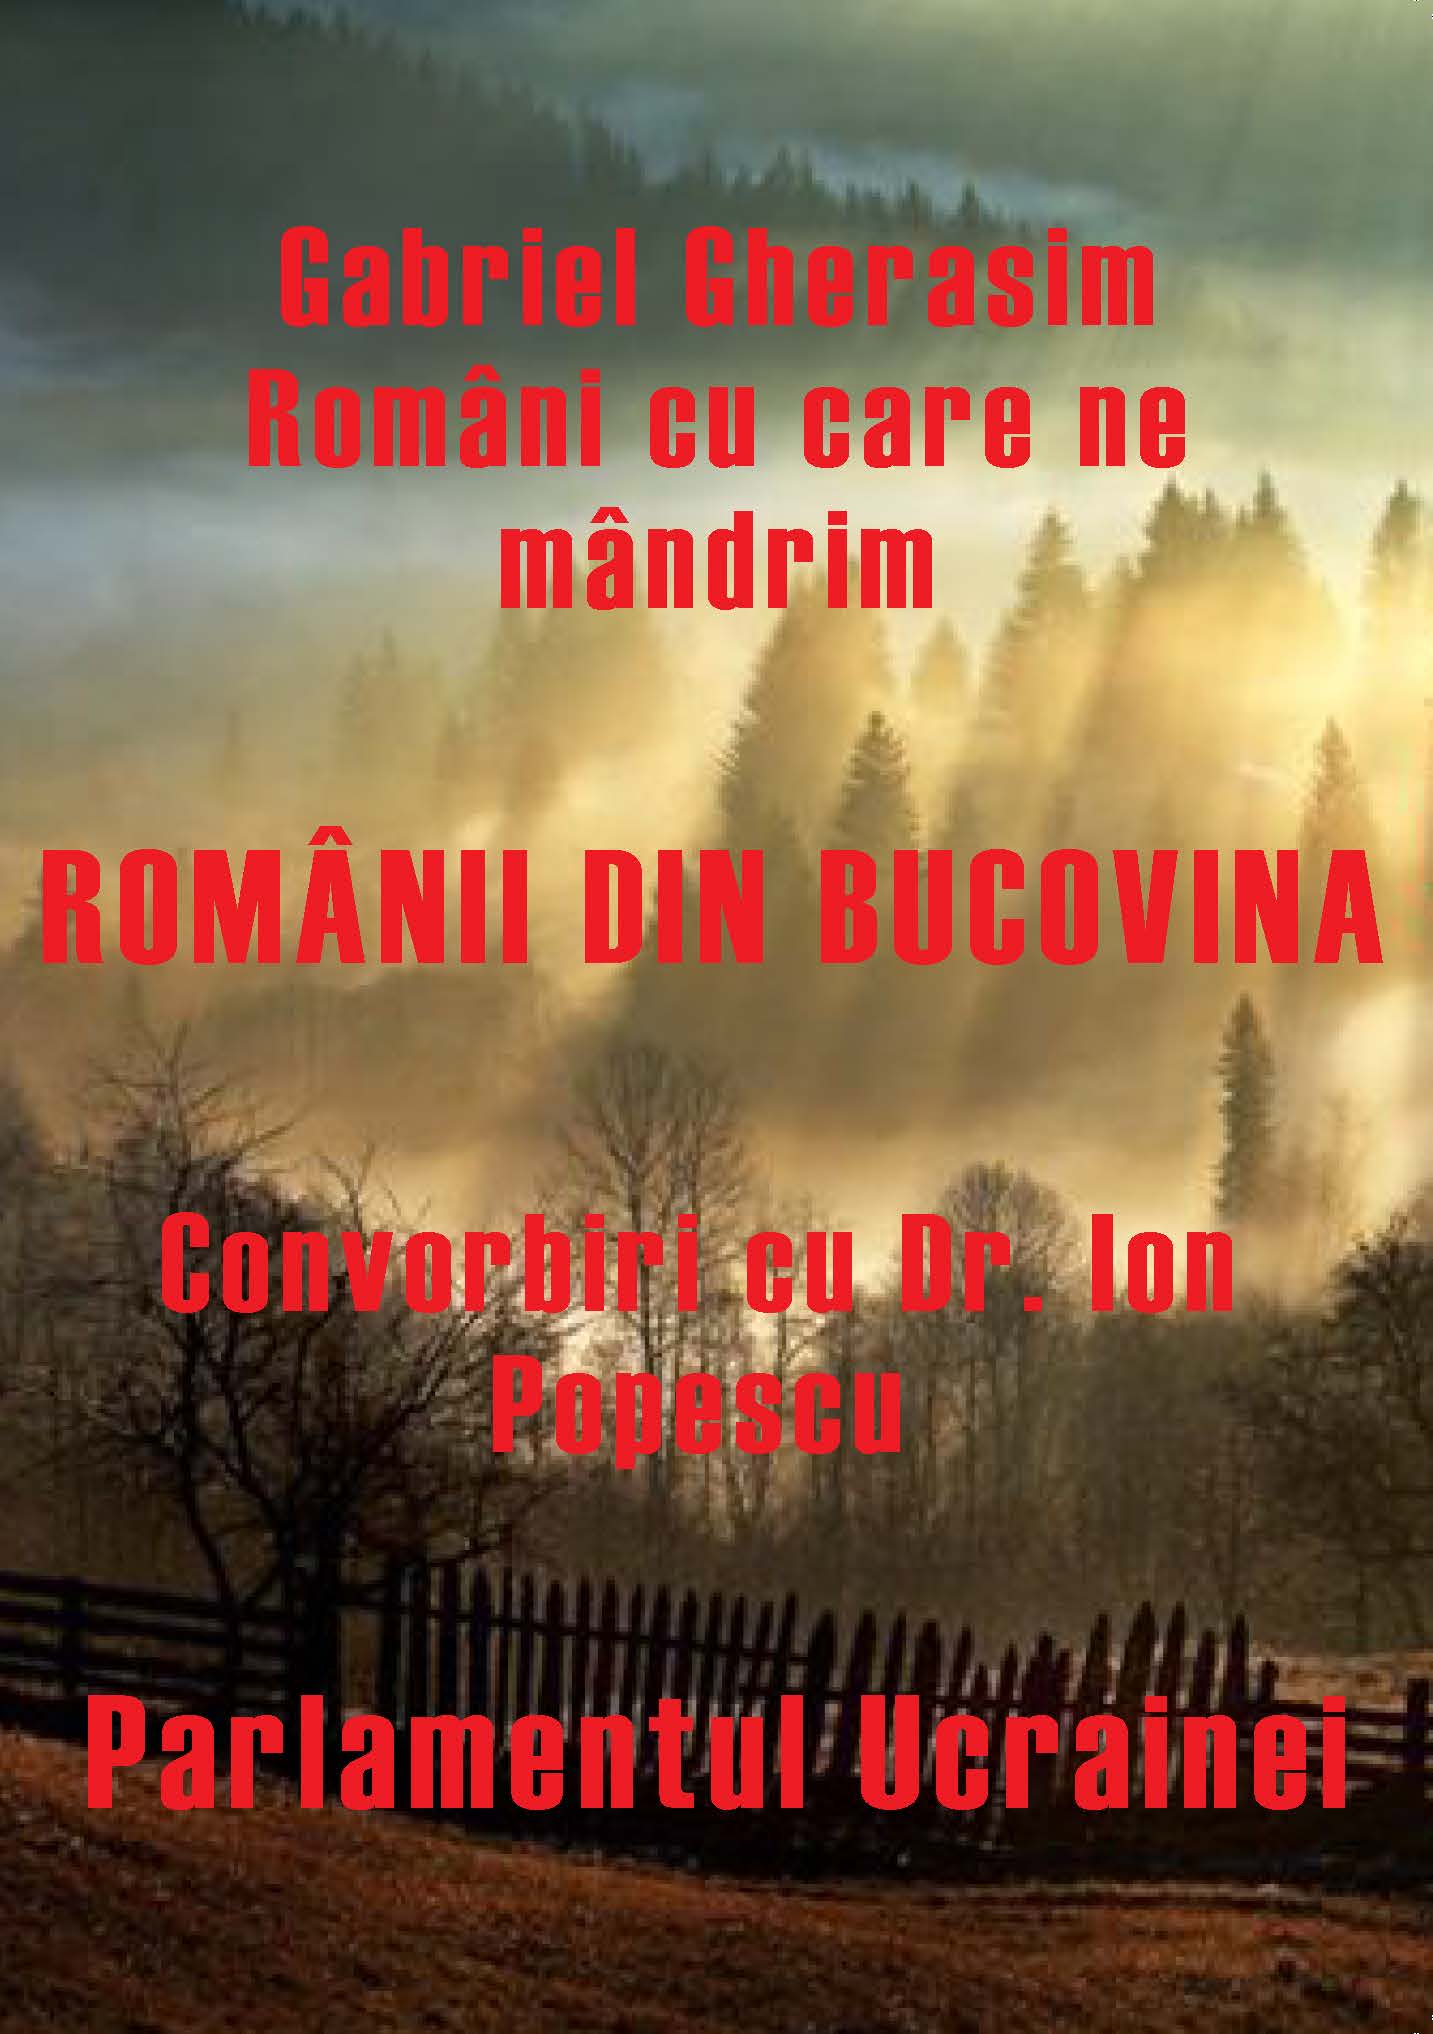 Romanians from Bucovina Interview with Dr. Ion Popescu PhD